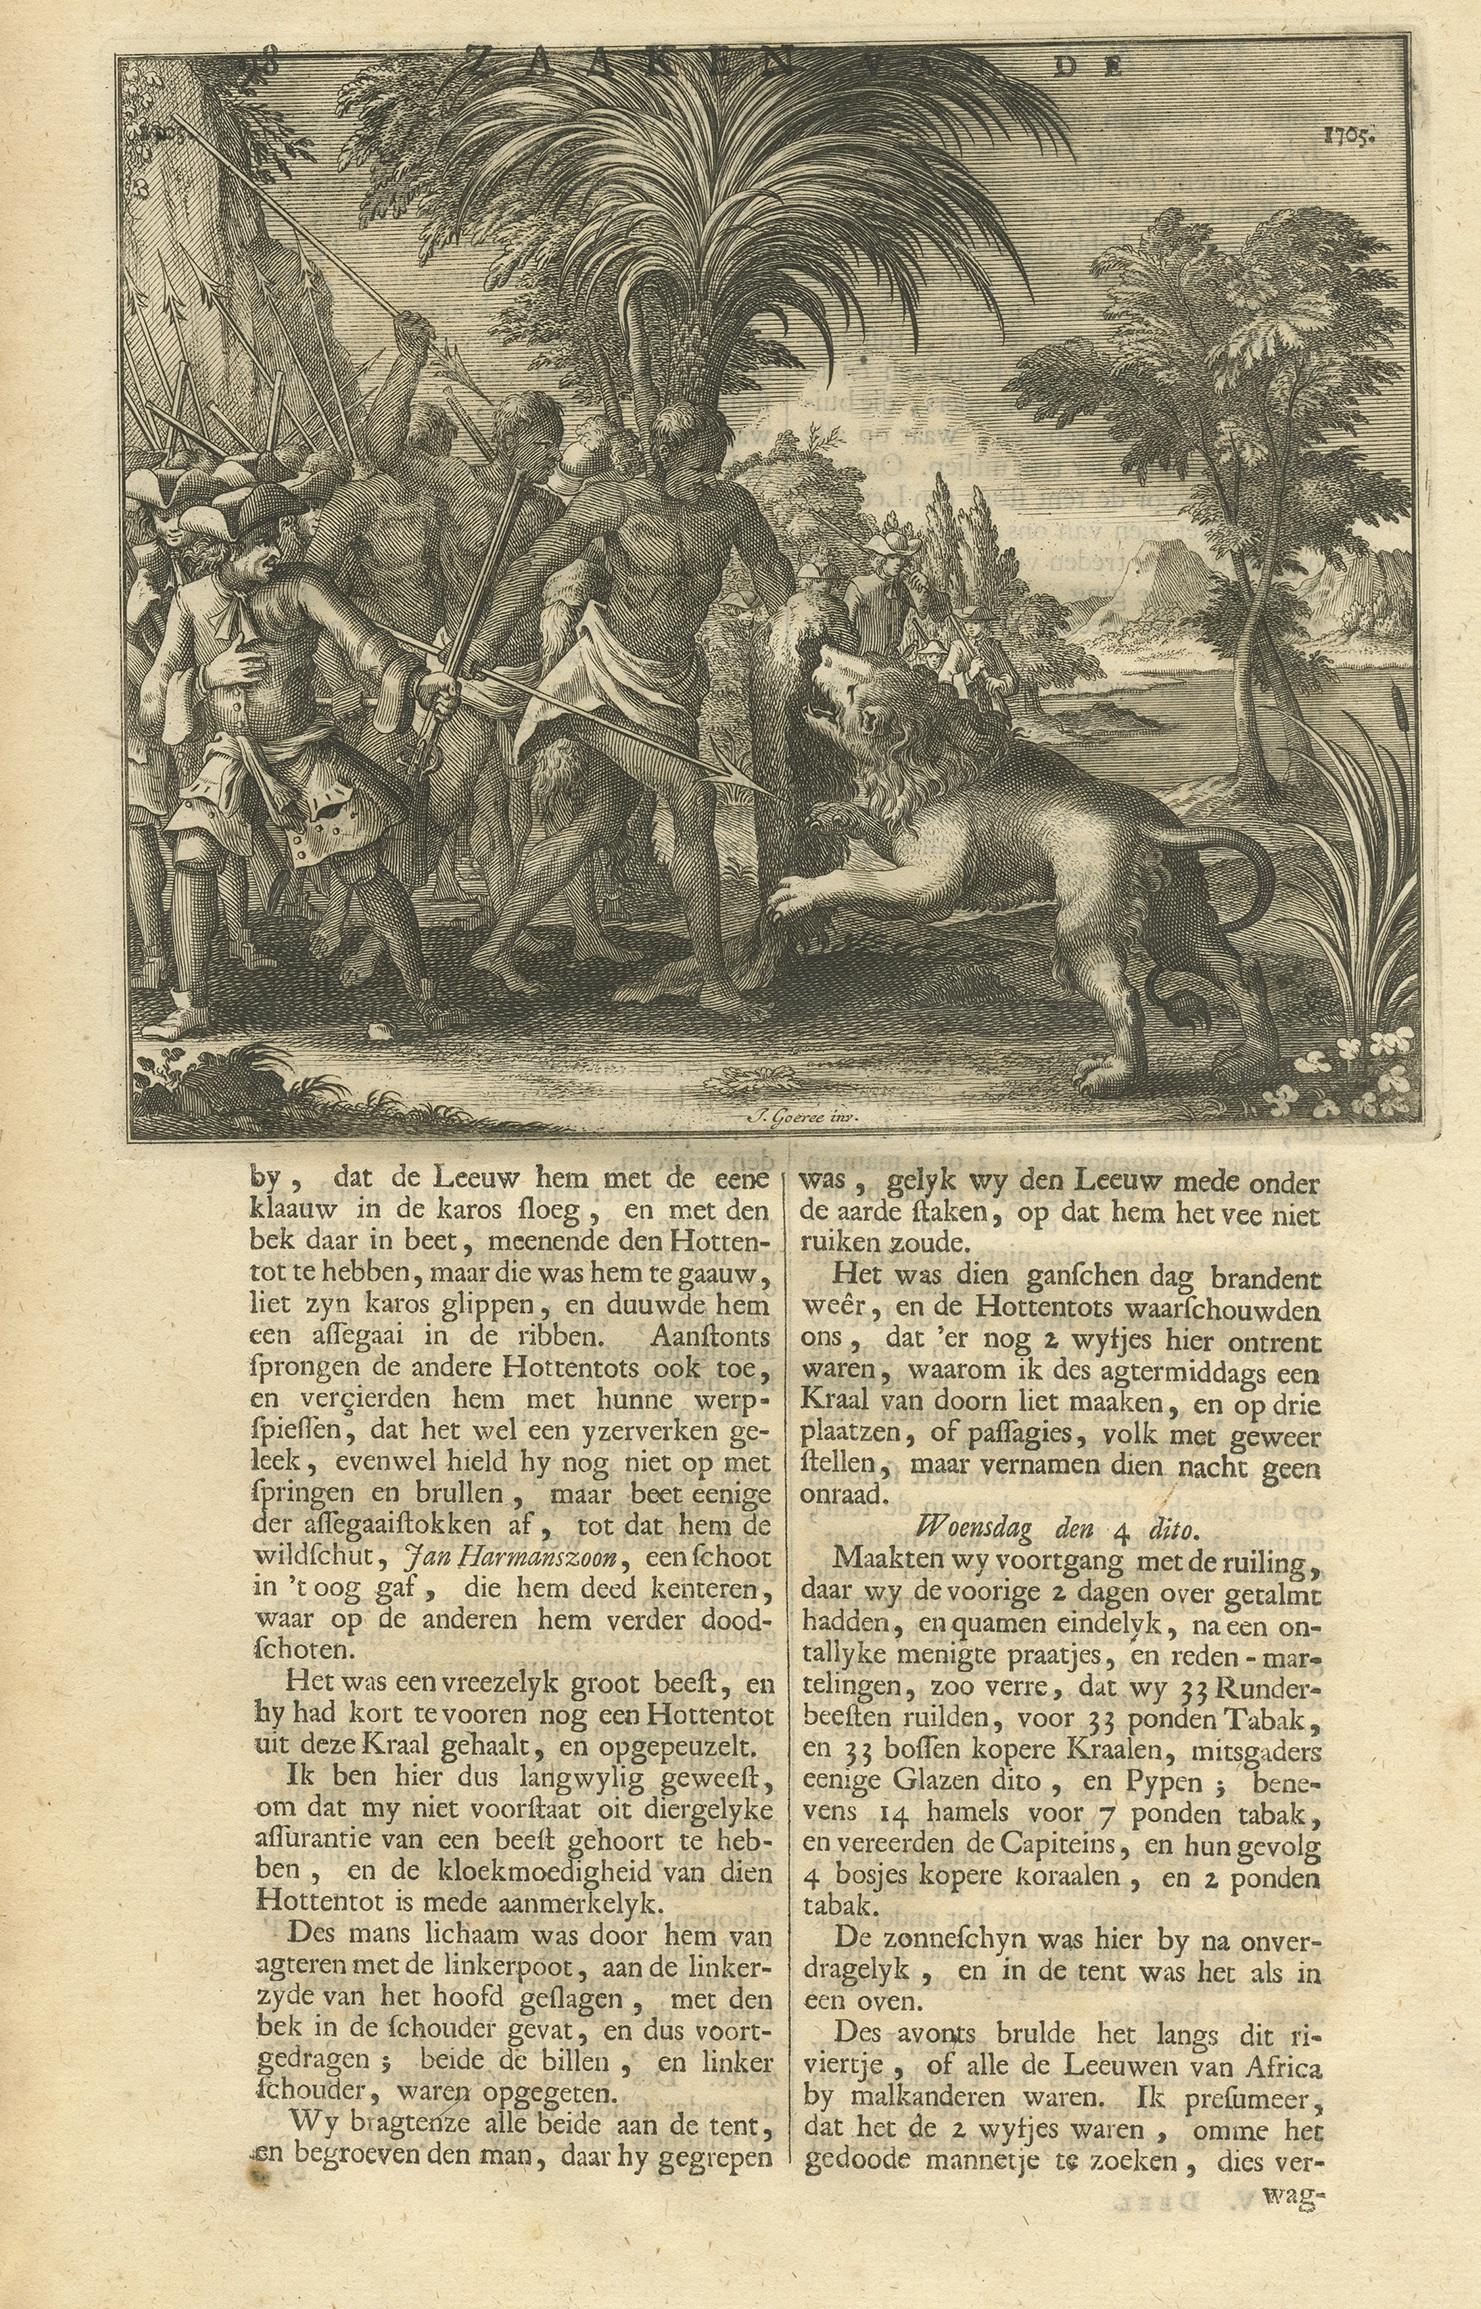 Untitled print depicting lion hunting in Africa. Text on verso. This print originates from 'Oud en Nieuw Oost-Indiën' by F. Valentijn.